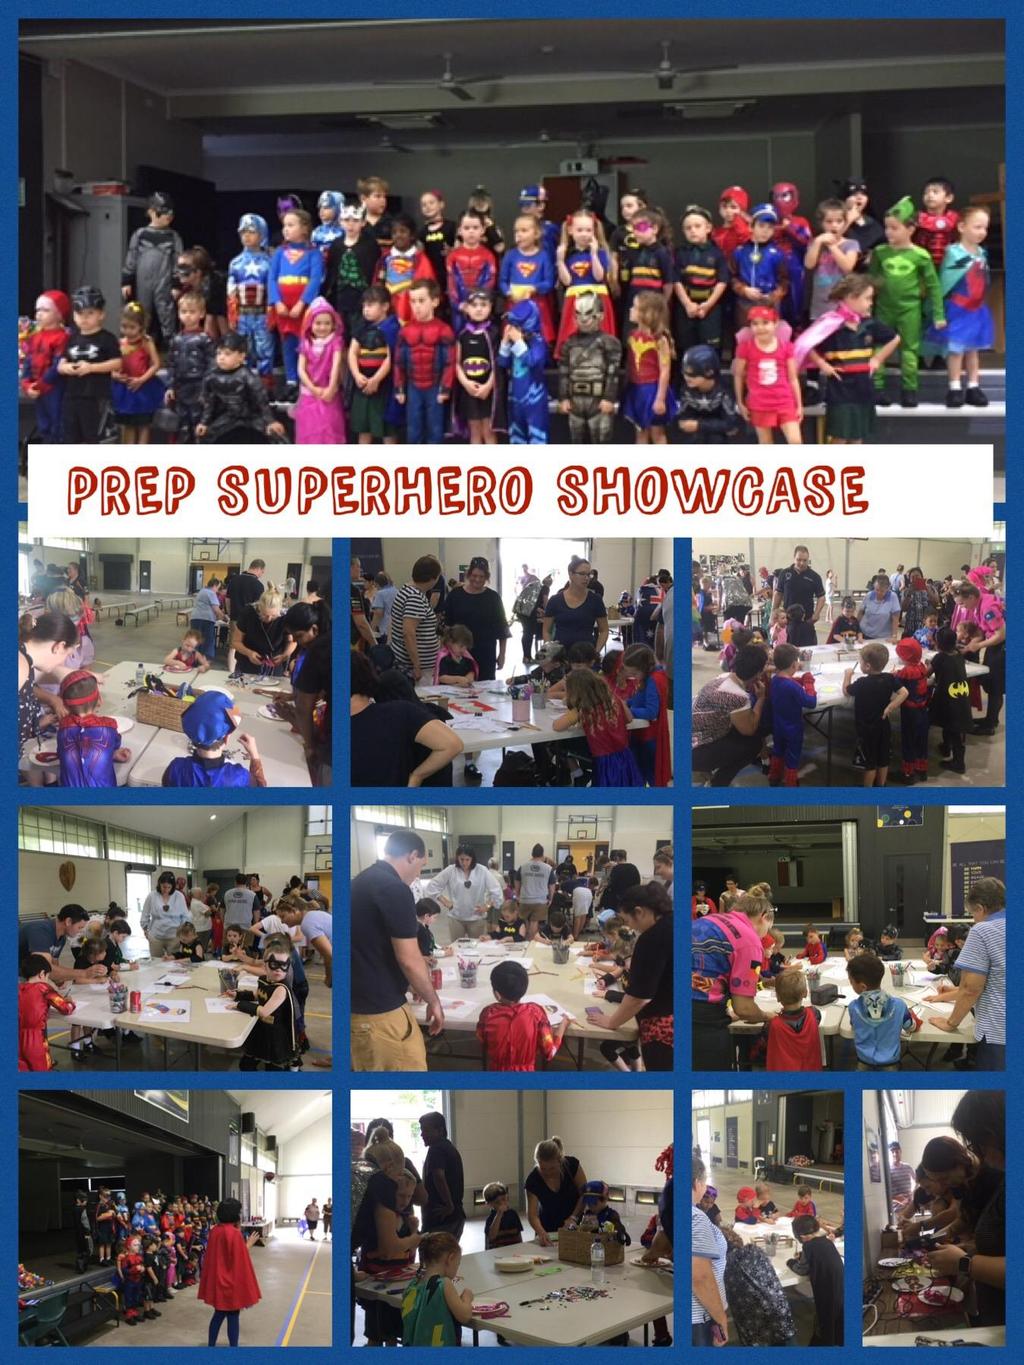 PREP SUPERHERO SHOWCASE On Tuesday, you may have noticed all the Superheroes around the school. The prep classrooms were overrun by superheroes and even the adults were dressed as superheroes.